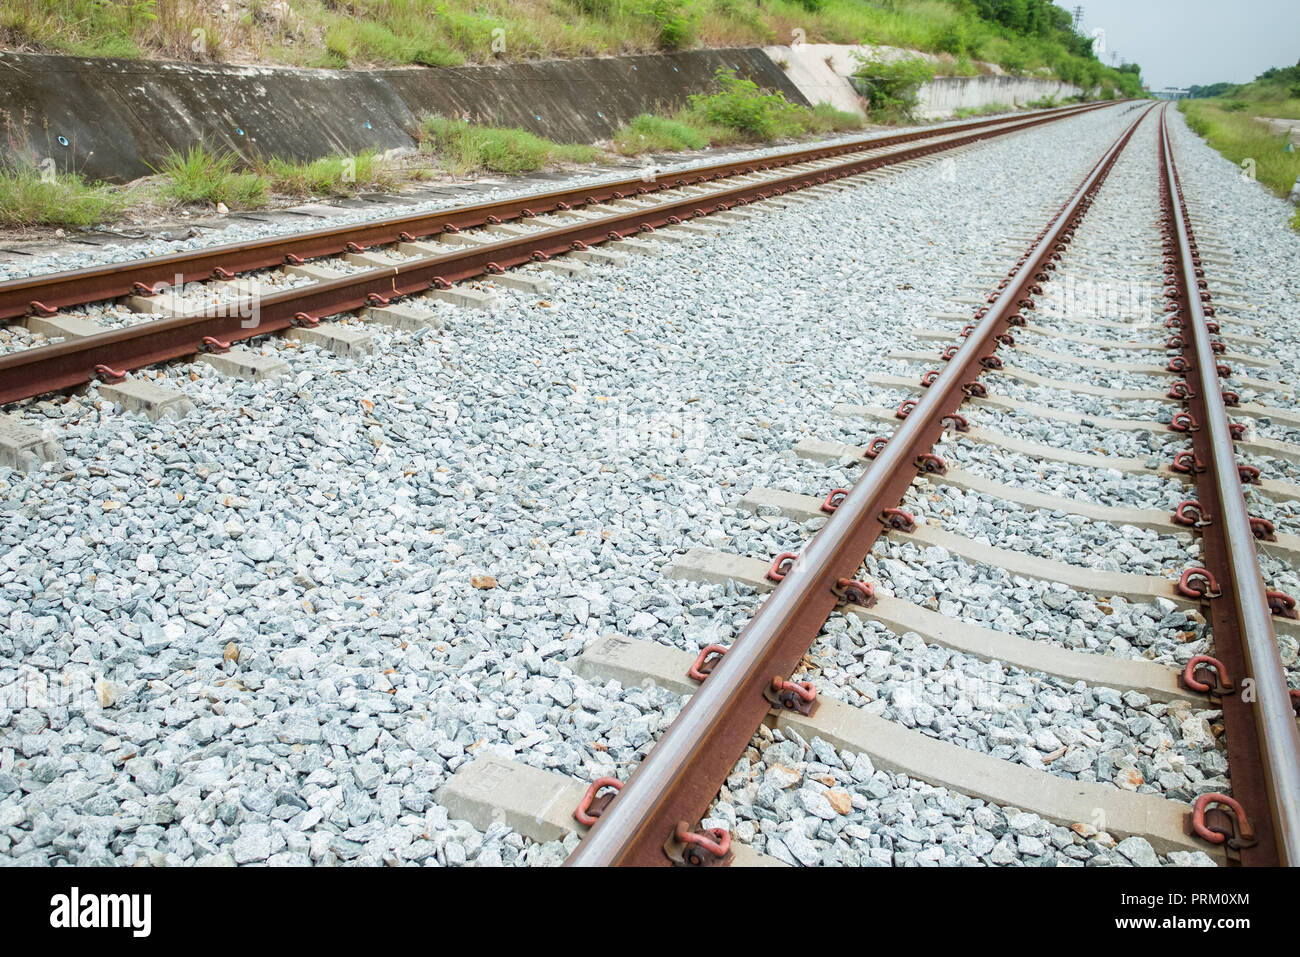 Along the railway in line of sight in Chonburi province, Thailand Stock Photo